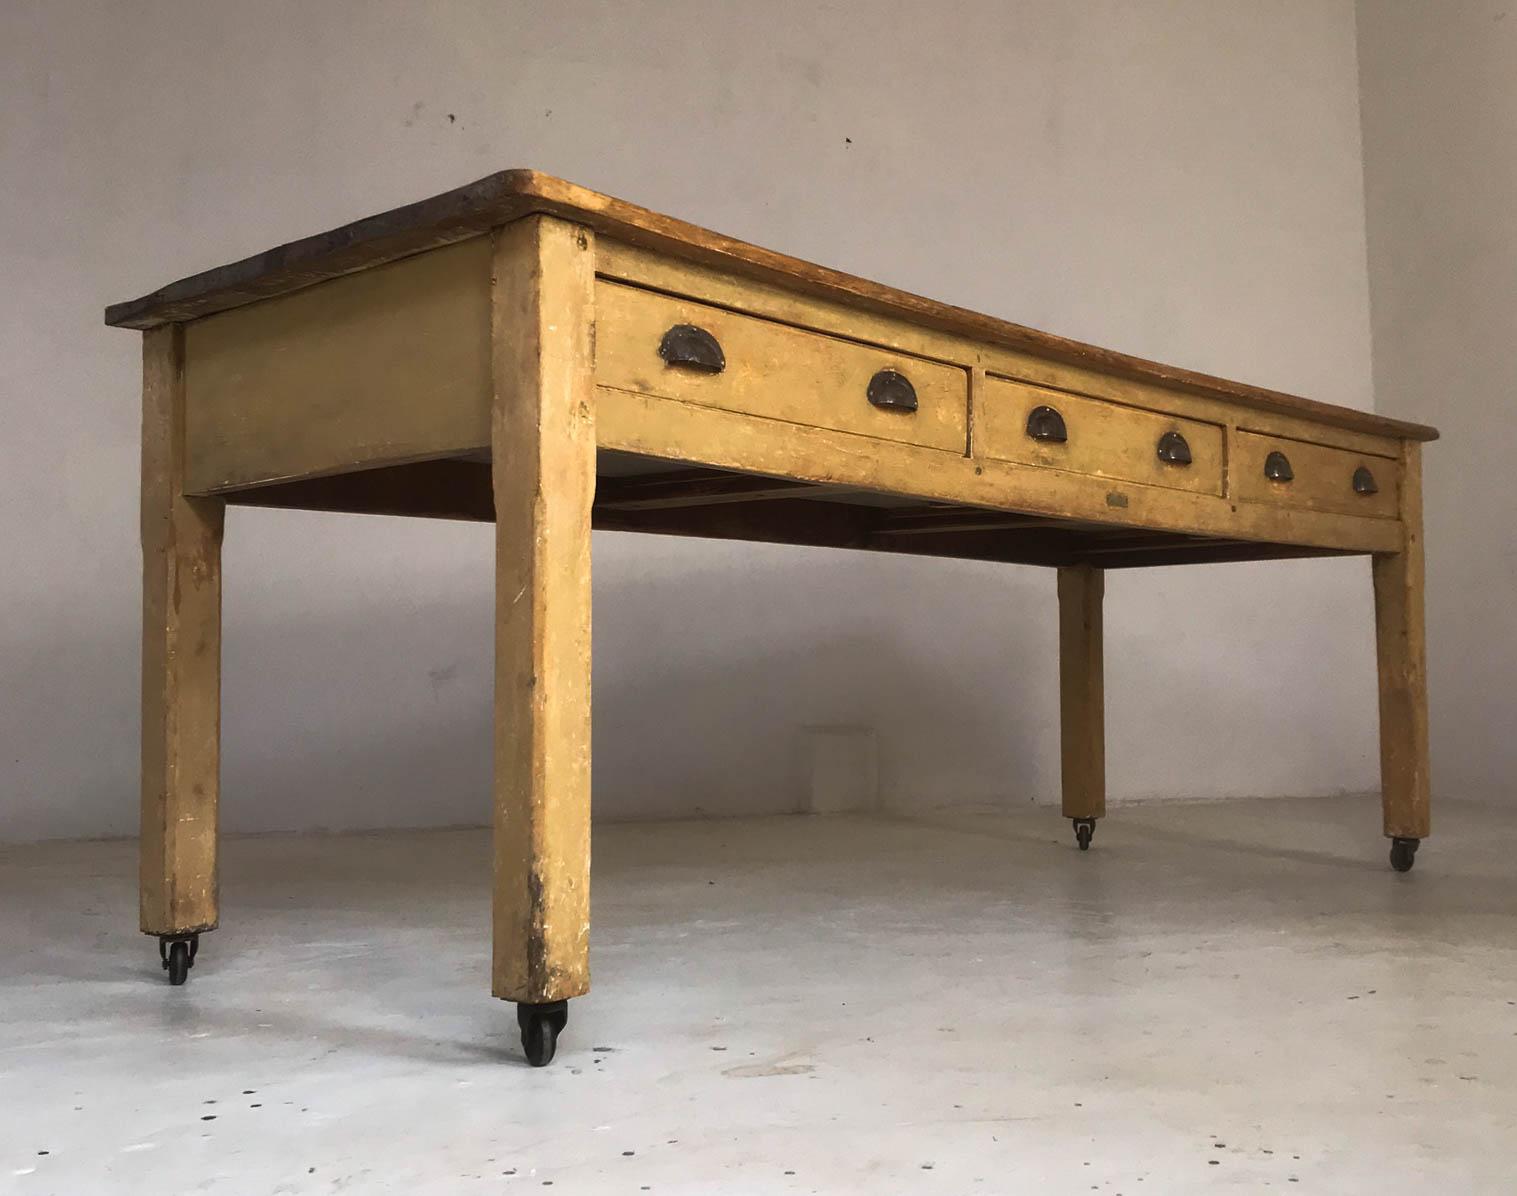 Original pine baker's table sourced from a bakery in Liverpool, England, that was sadly closing its doors for the final time. It was manufactured during the 1930s by renowned bakery fitters T. H. Tonge who were based in Manchester. The pine base has